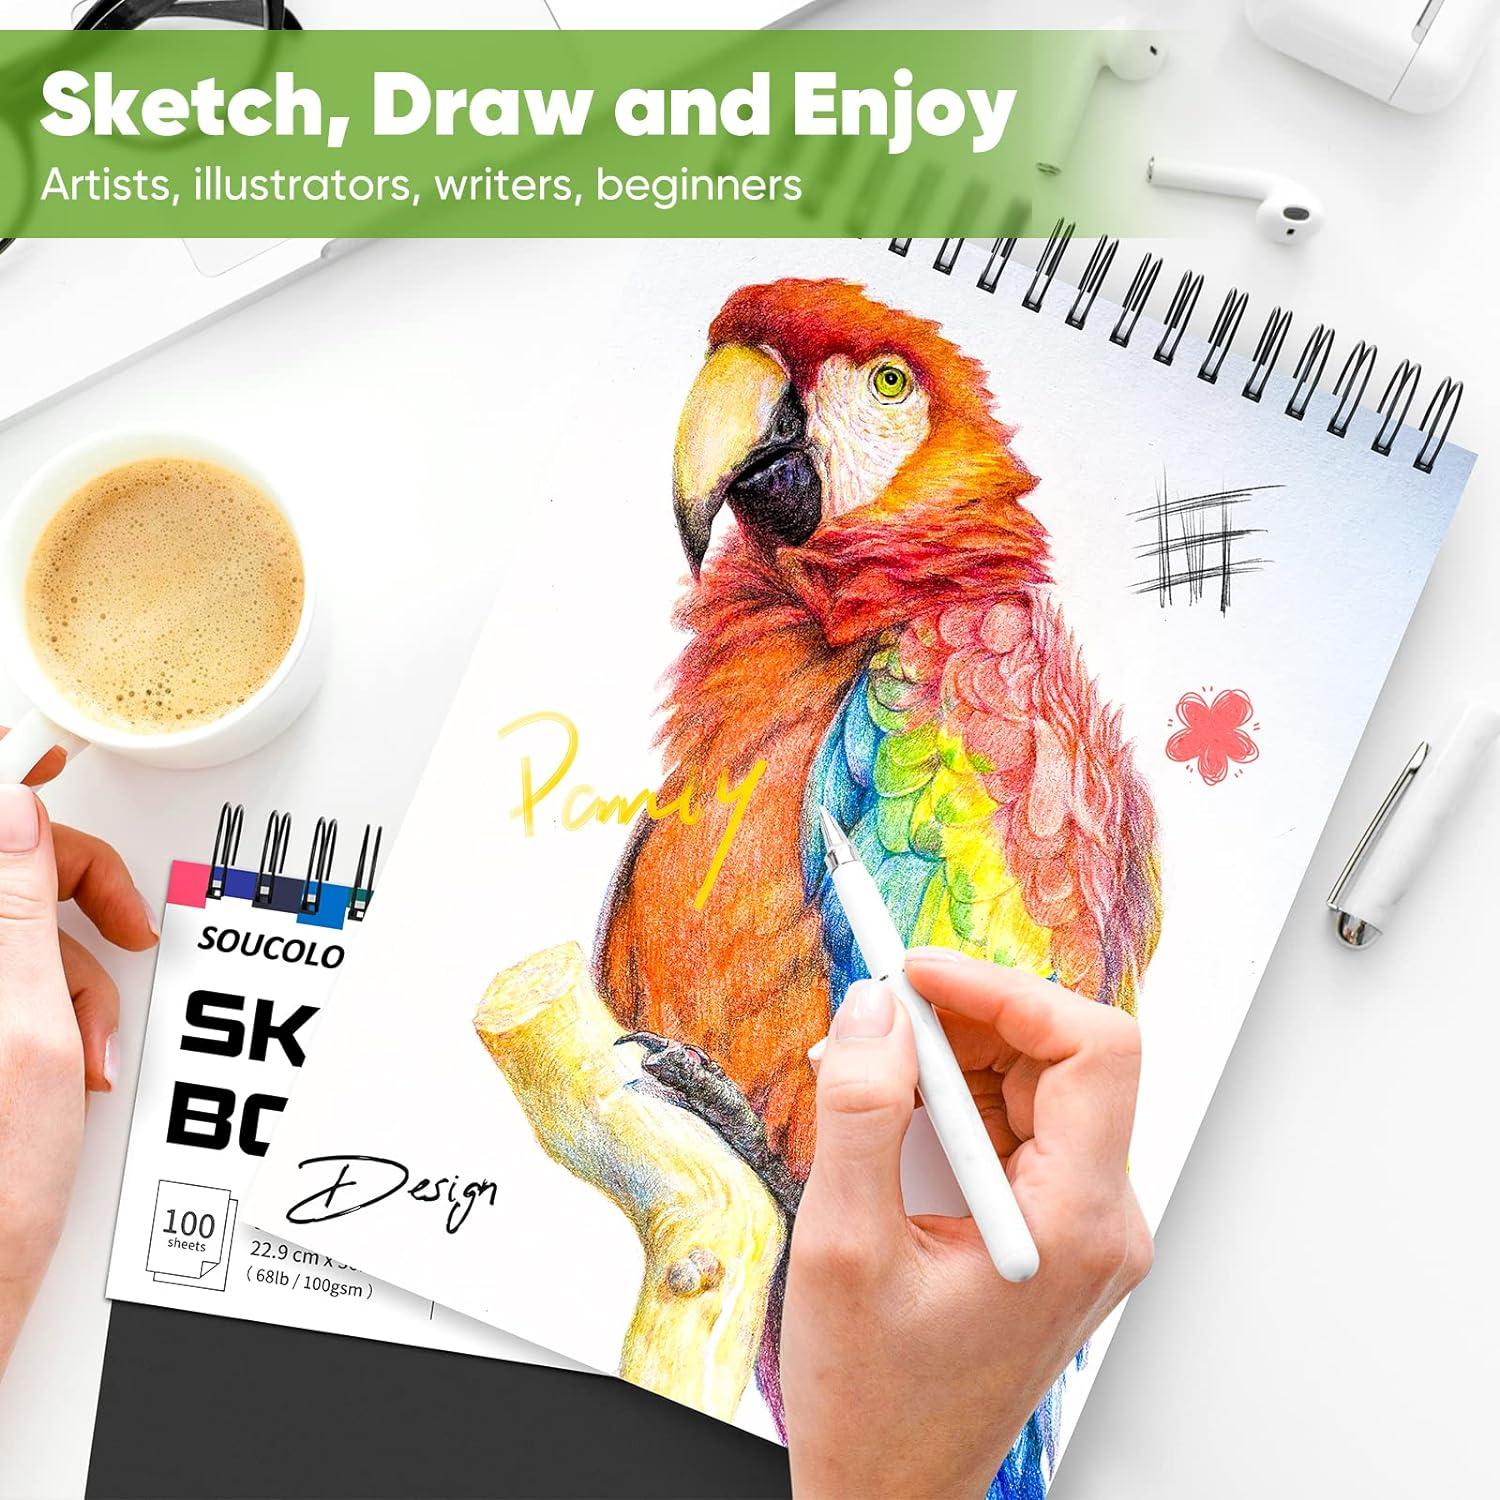 Sketch Book: Large Water Colour Puppy Sketch Pad for Drawing Doodling  Scribbling Painting Sketching: 121 Pages 8.5 x 11 Premium Sketchbook  Blank  Boys Teens Tweens Adults Who Love To Create by